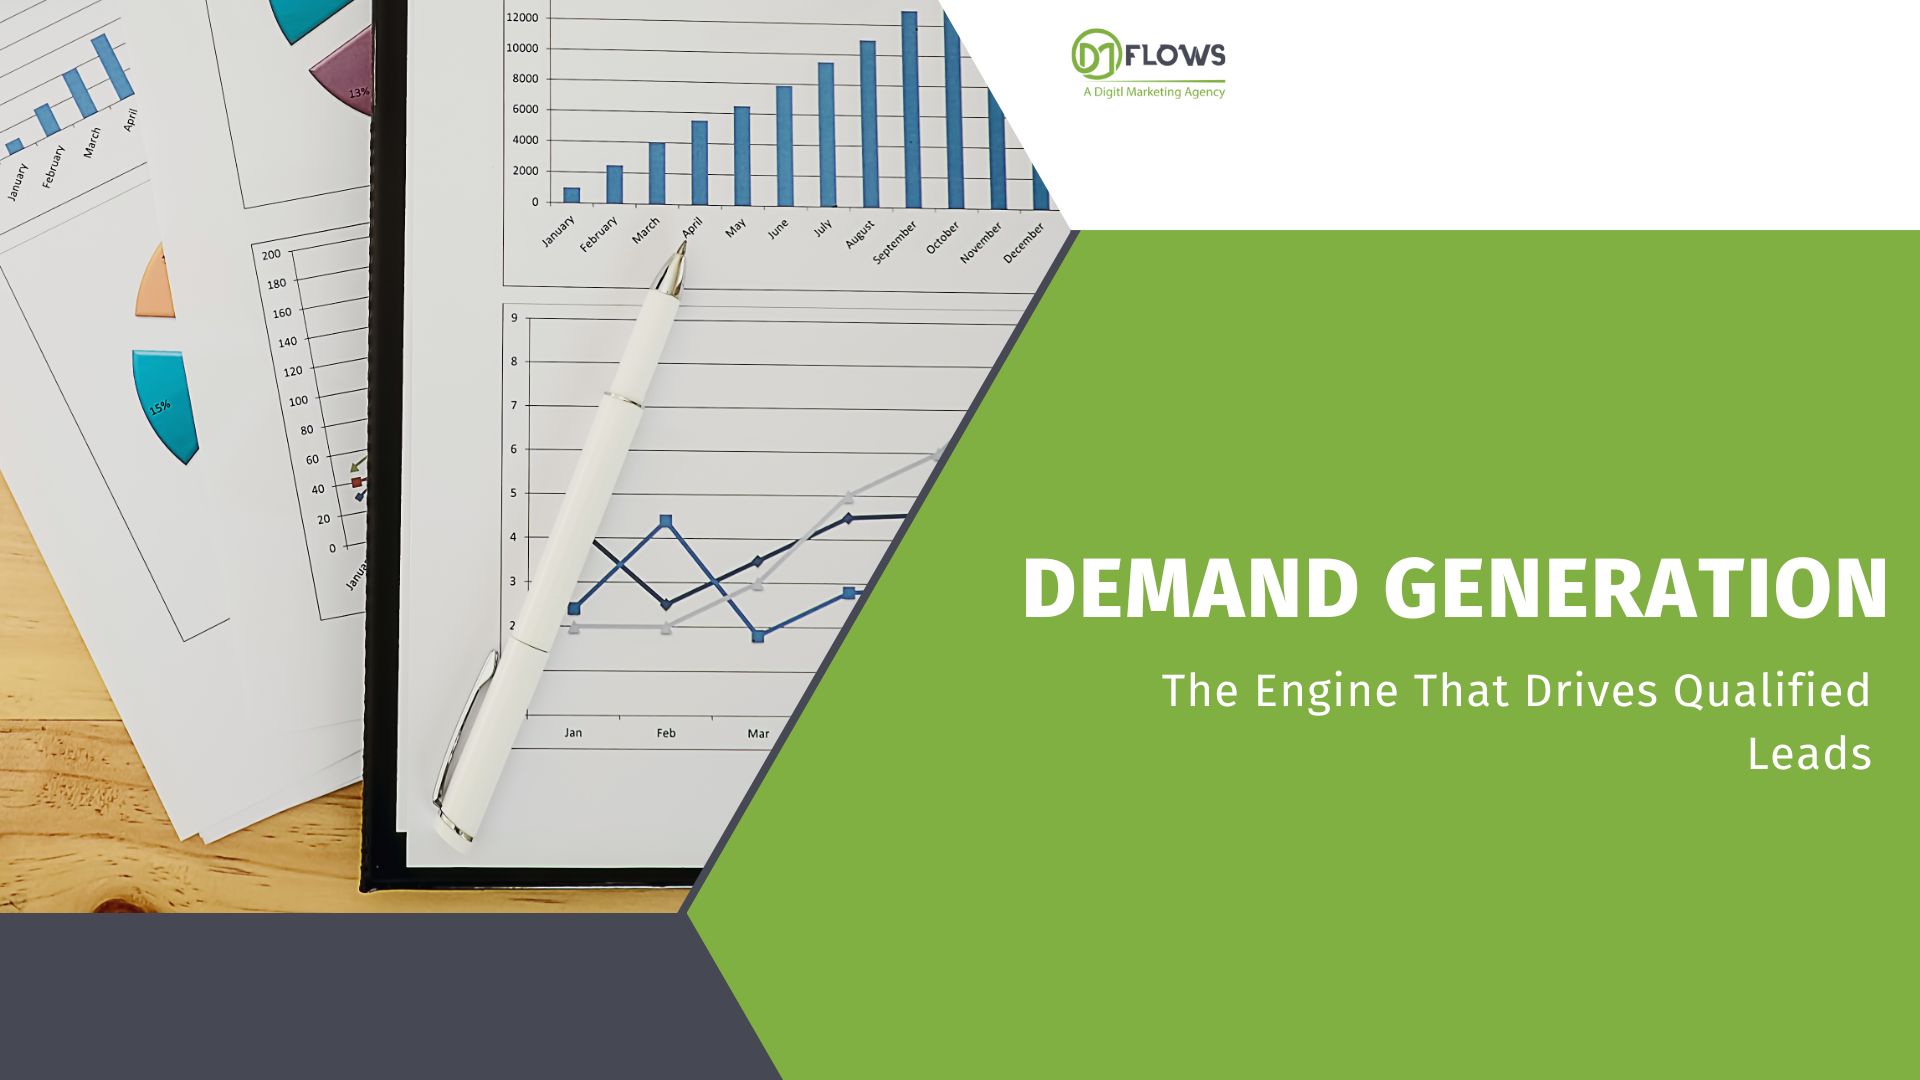 Demand Generation: The Engine that Drives Qualified Leads